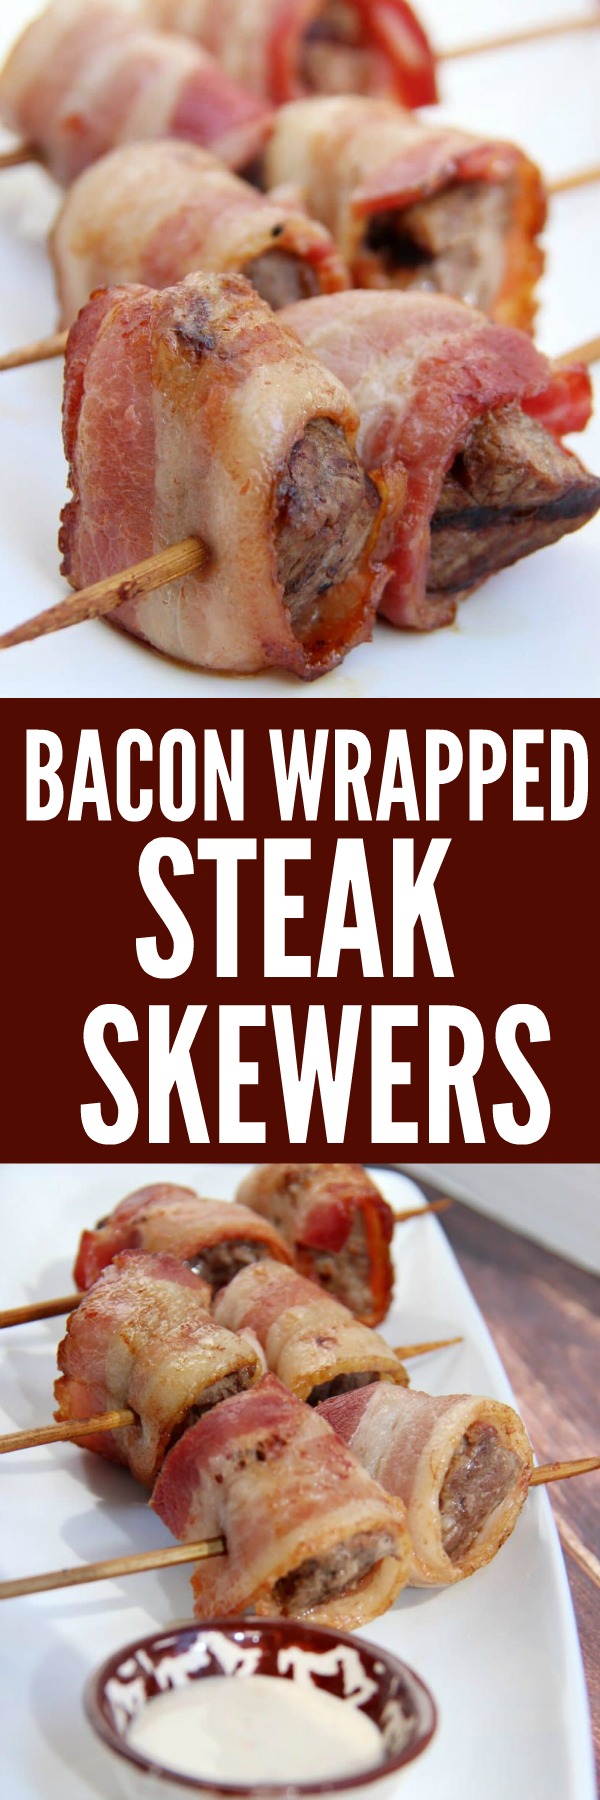 Bacon wrapped steak skewers - made in the oven.